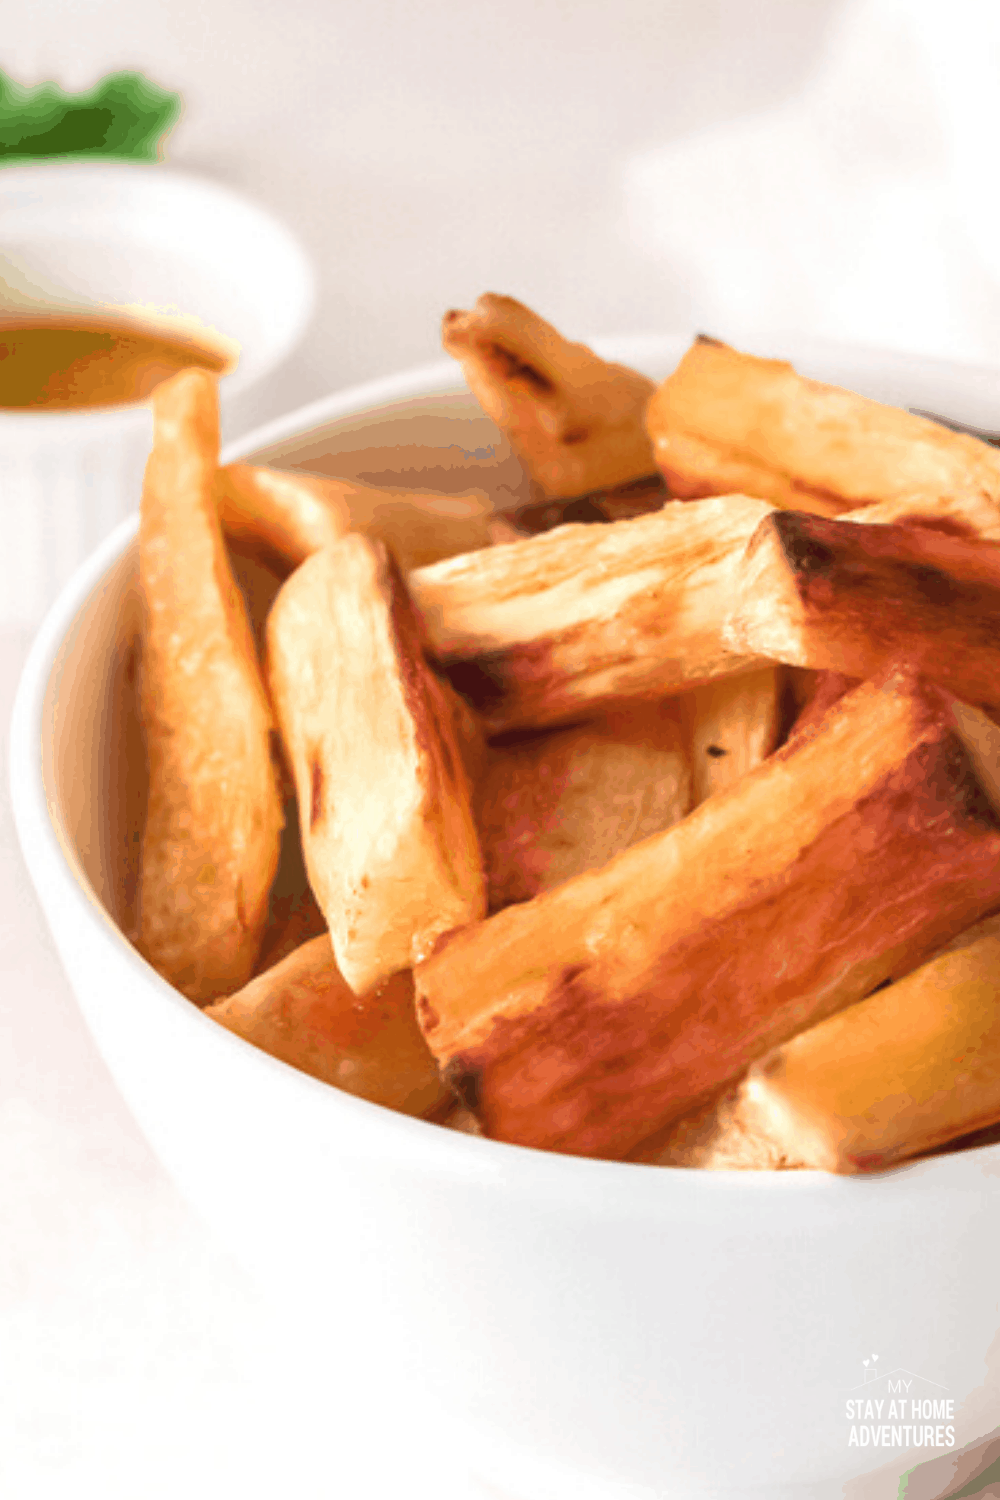 With only 3 ingredients, baked to crispiness on the outside and tender on the inside, this Yuca Fries is the perfect hearty snack. via @mystayathome